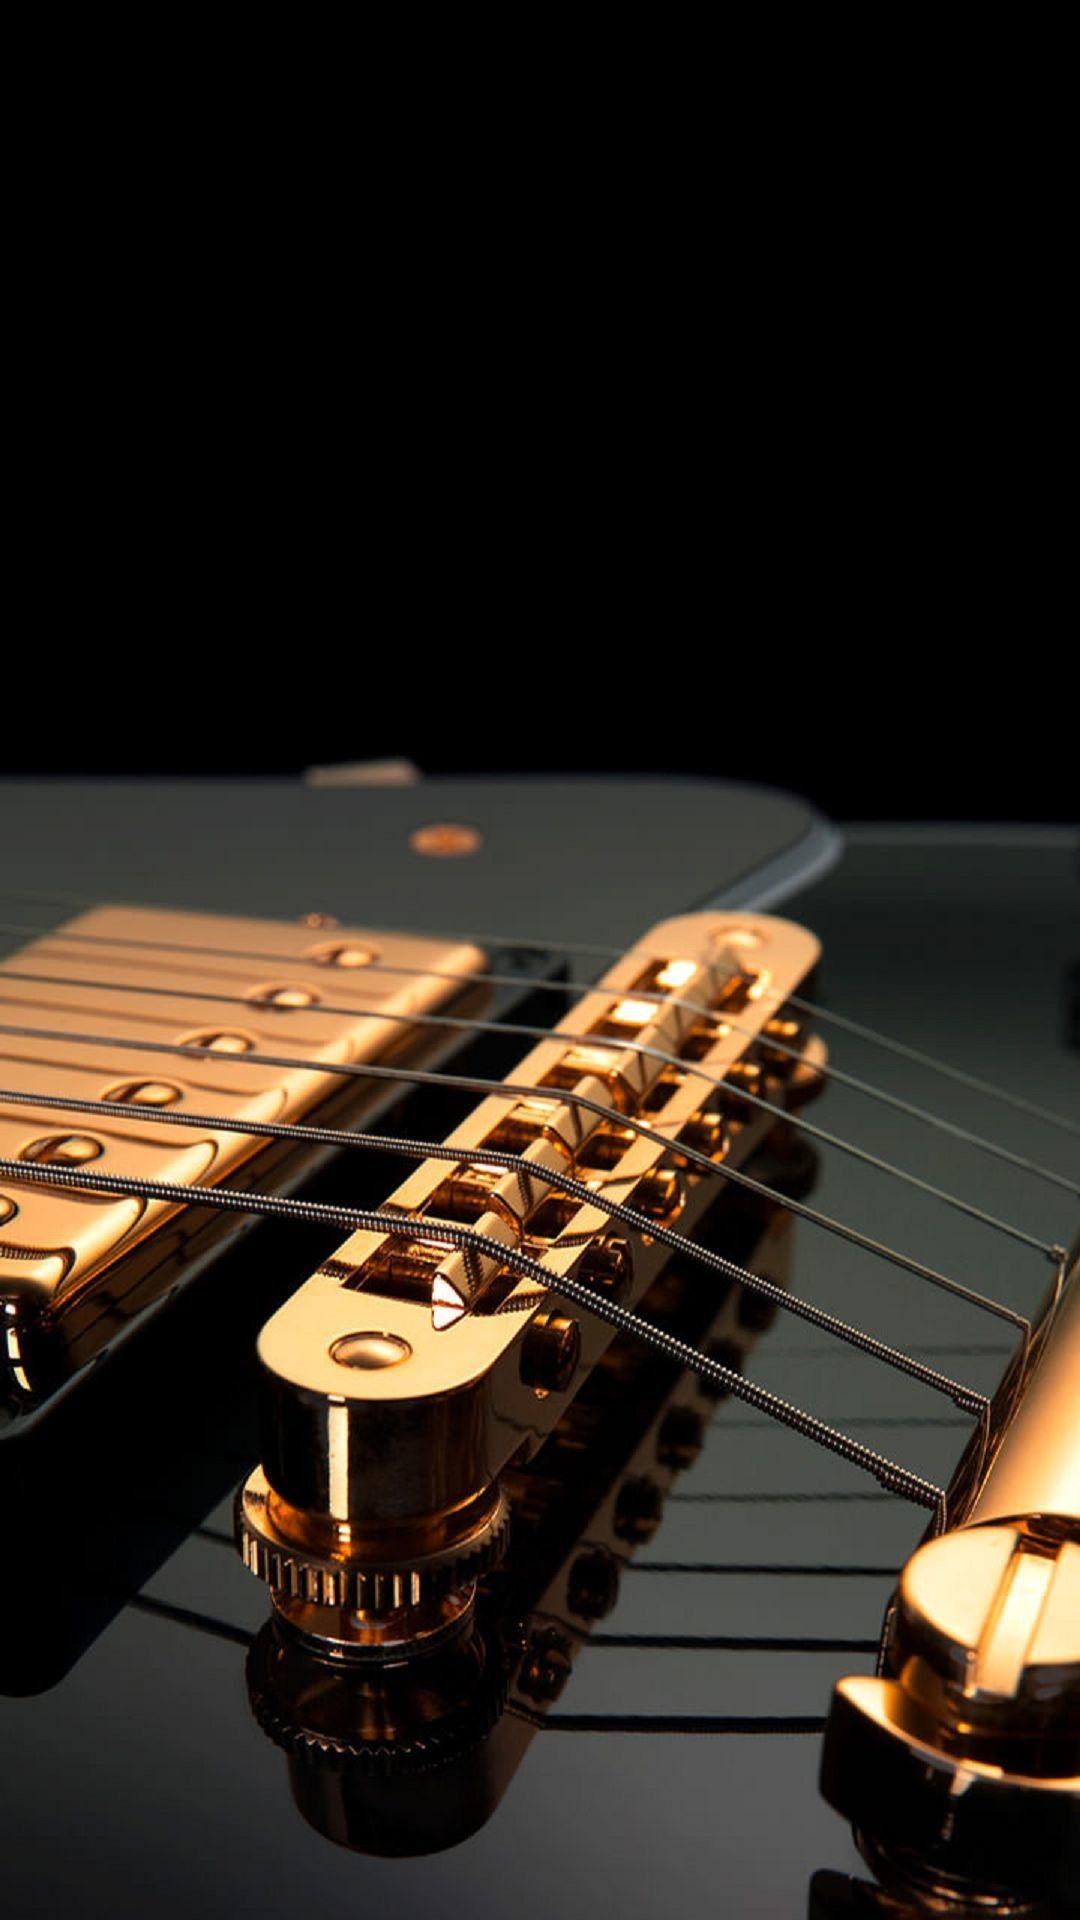 Guitar Strings Black Gold Android Wallpaper free download